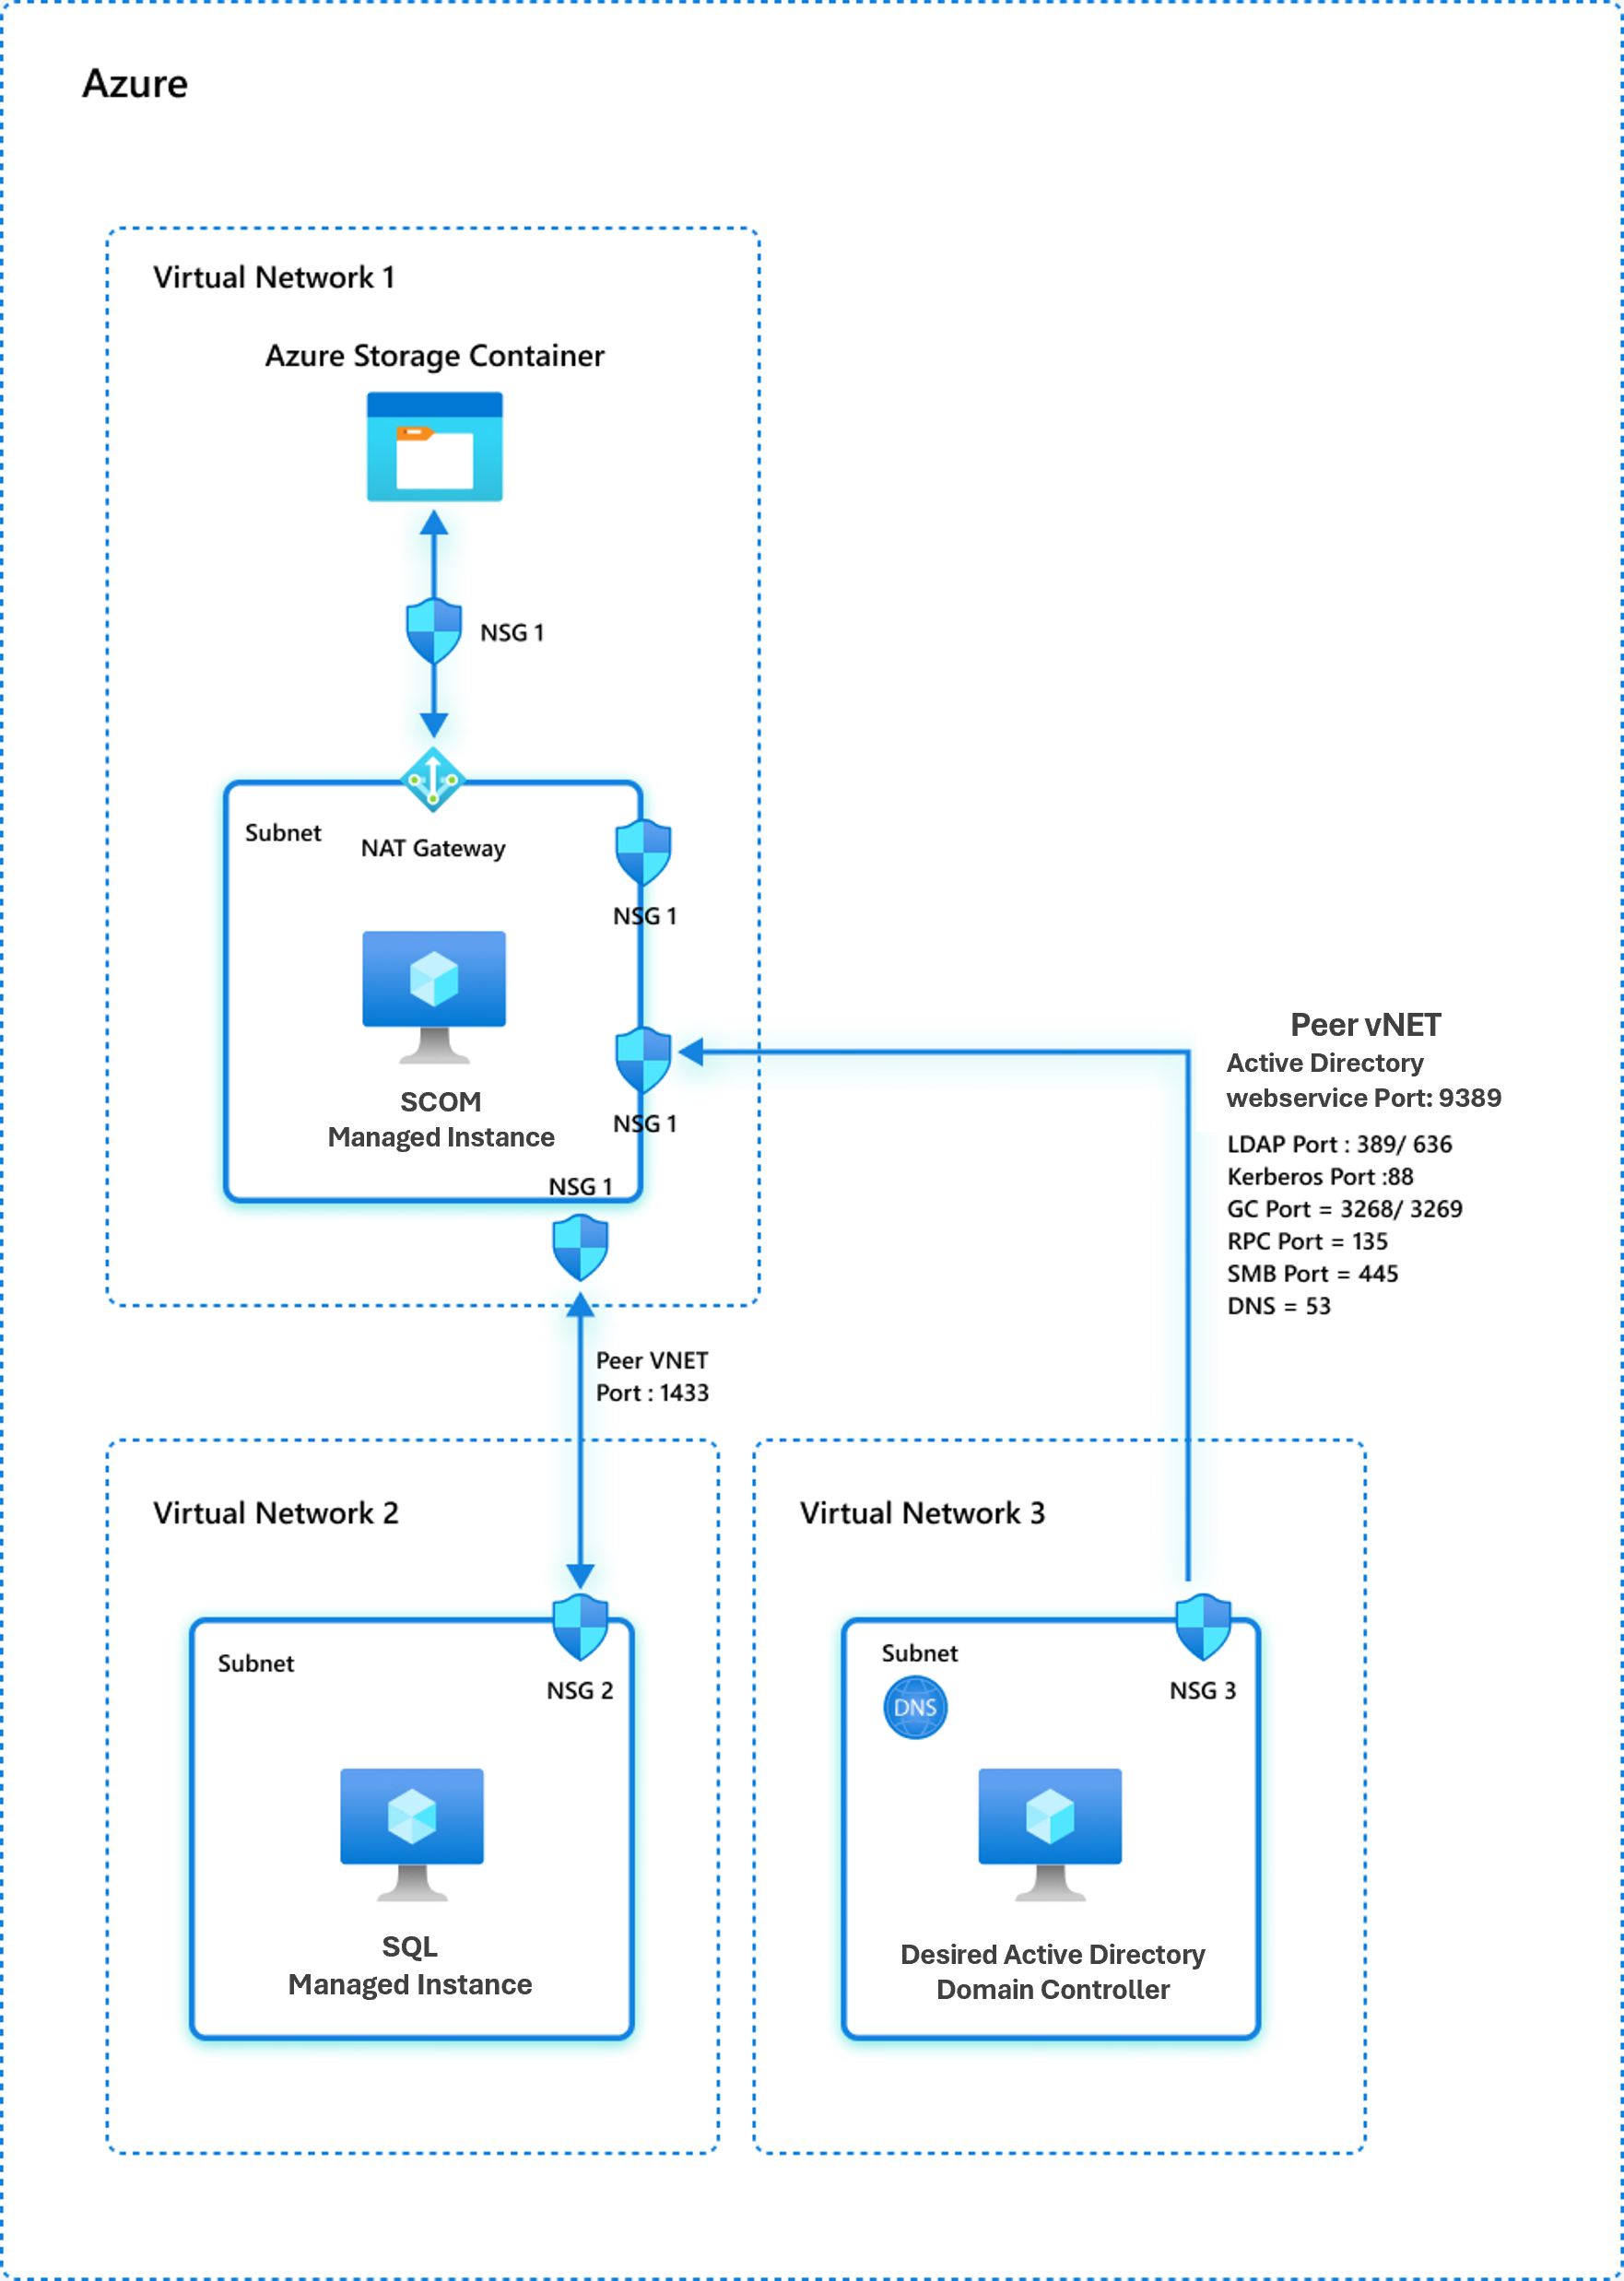 Screenshot that shows the network model 2 with the domain controller hosted in Azure.